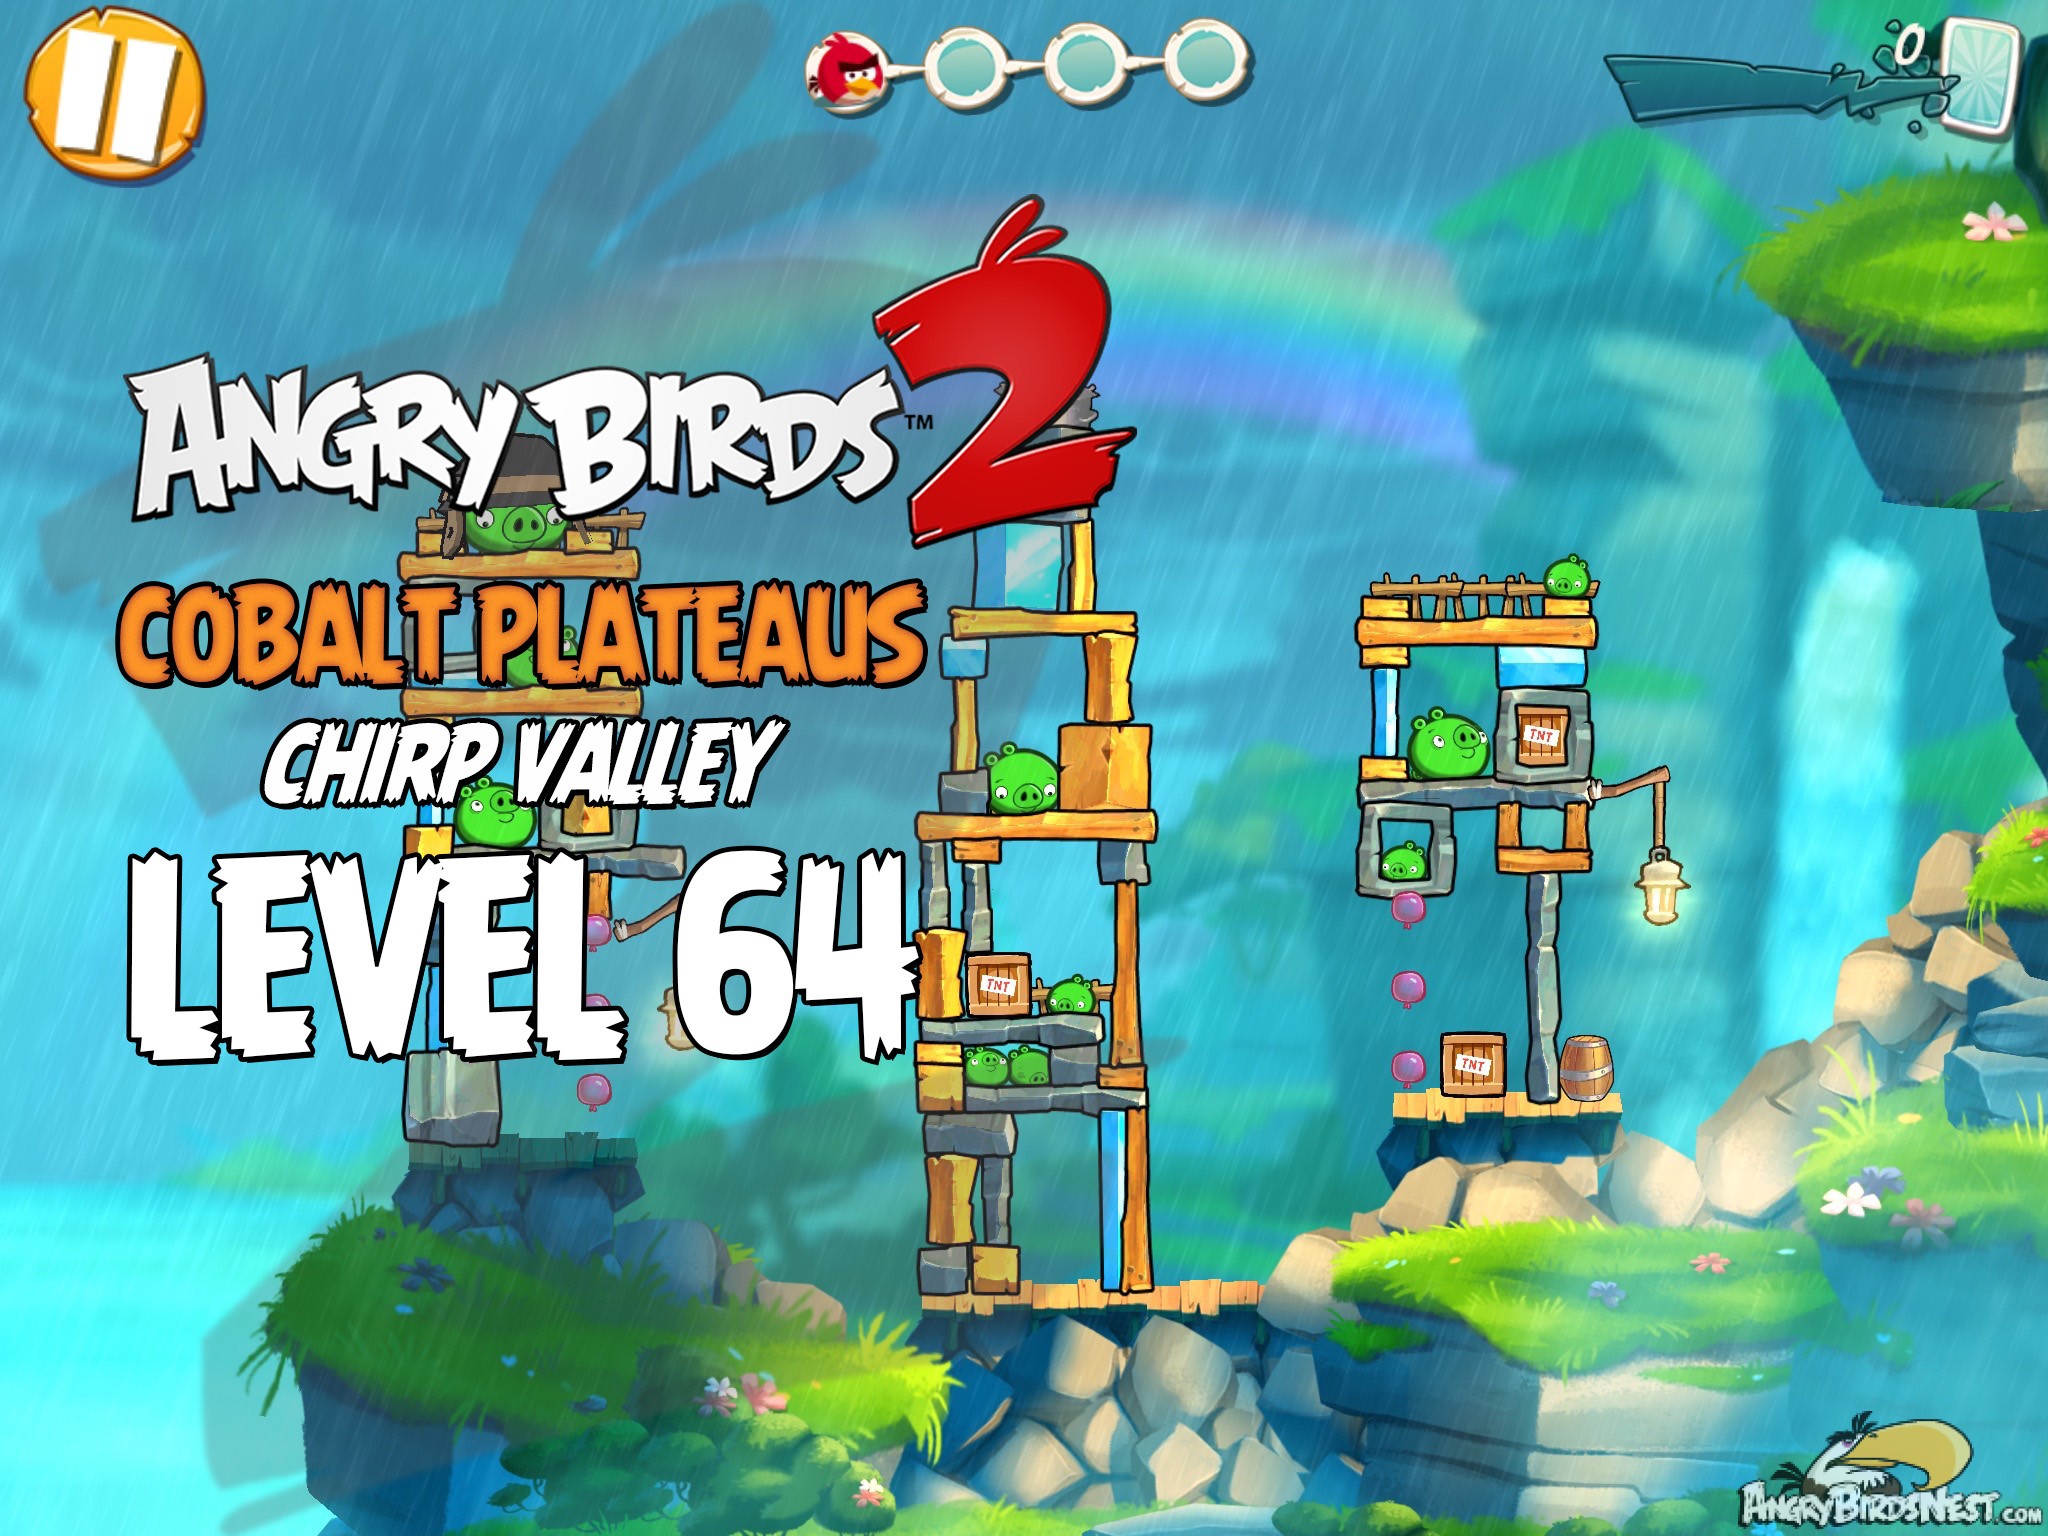 Angry Birds 2 Cobalt Plateaus Chirp Valley Level 64